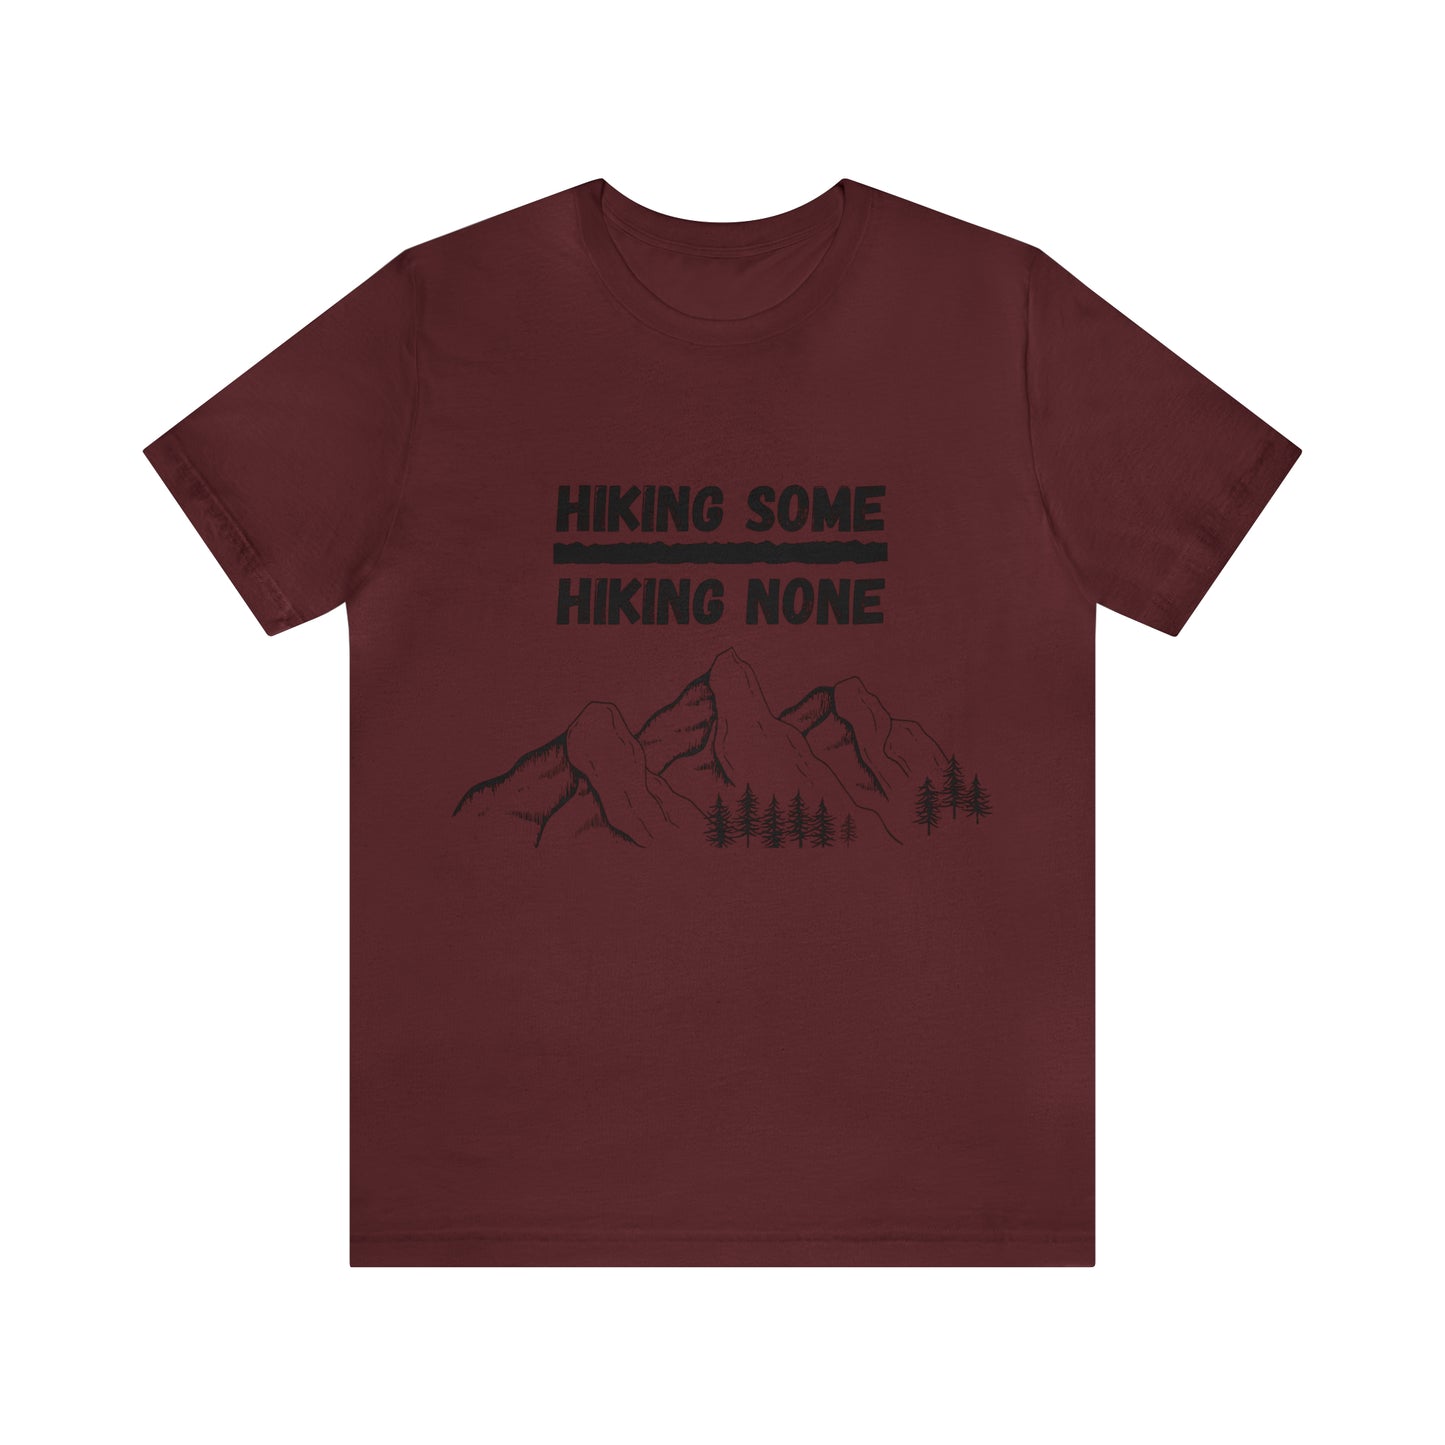 Hiking some over hiking none shirt, Hiking some is better than hiking none shirt, shirt for hikers, shirt for hike lovers, mountain t-shirt